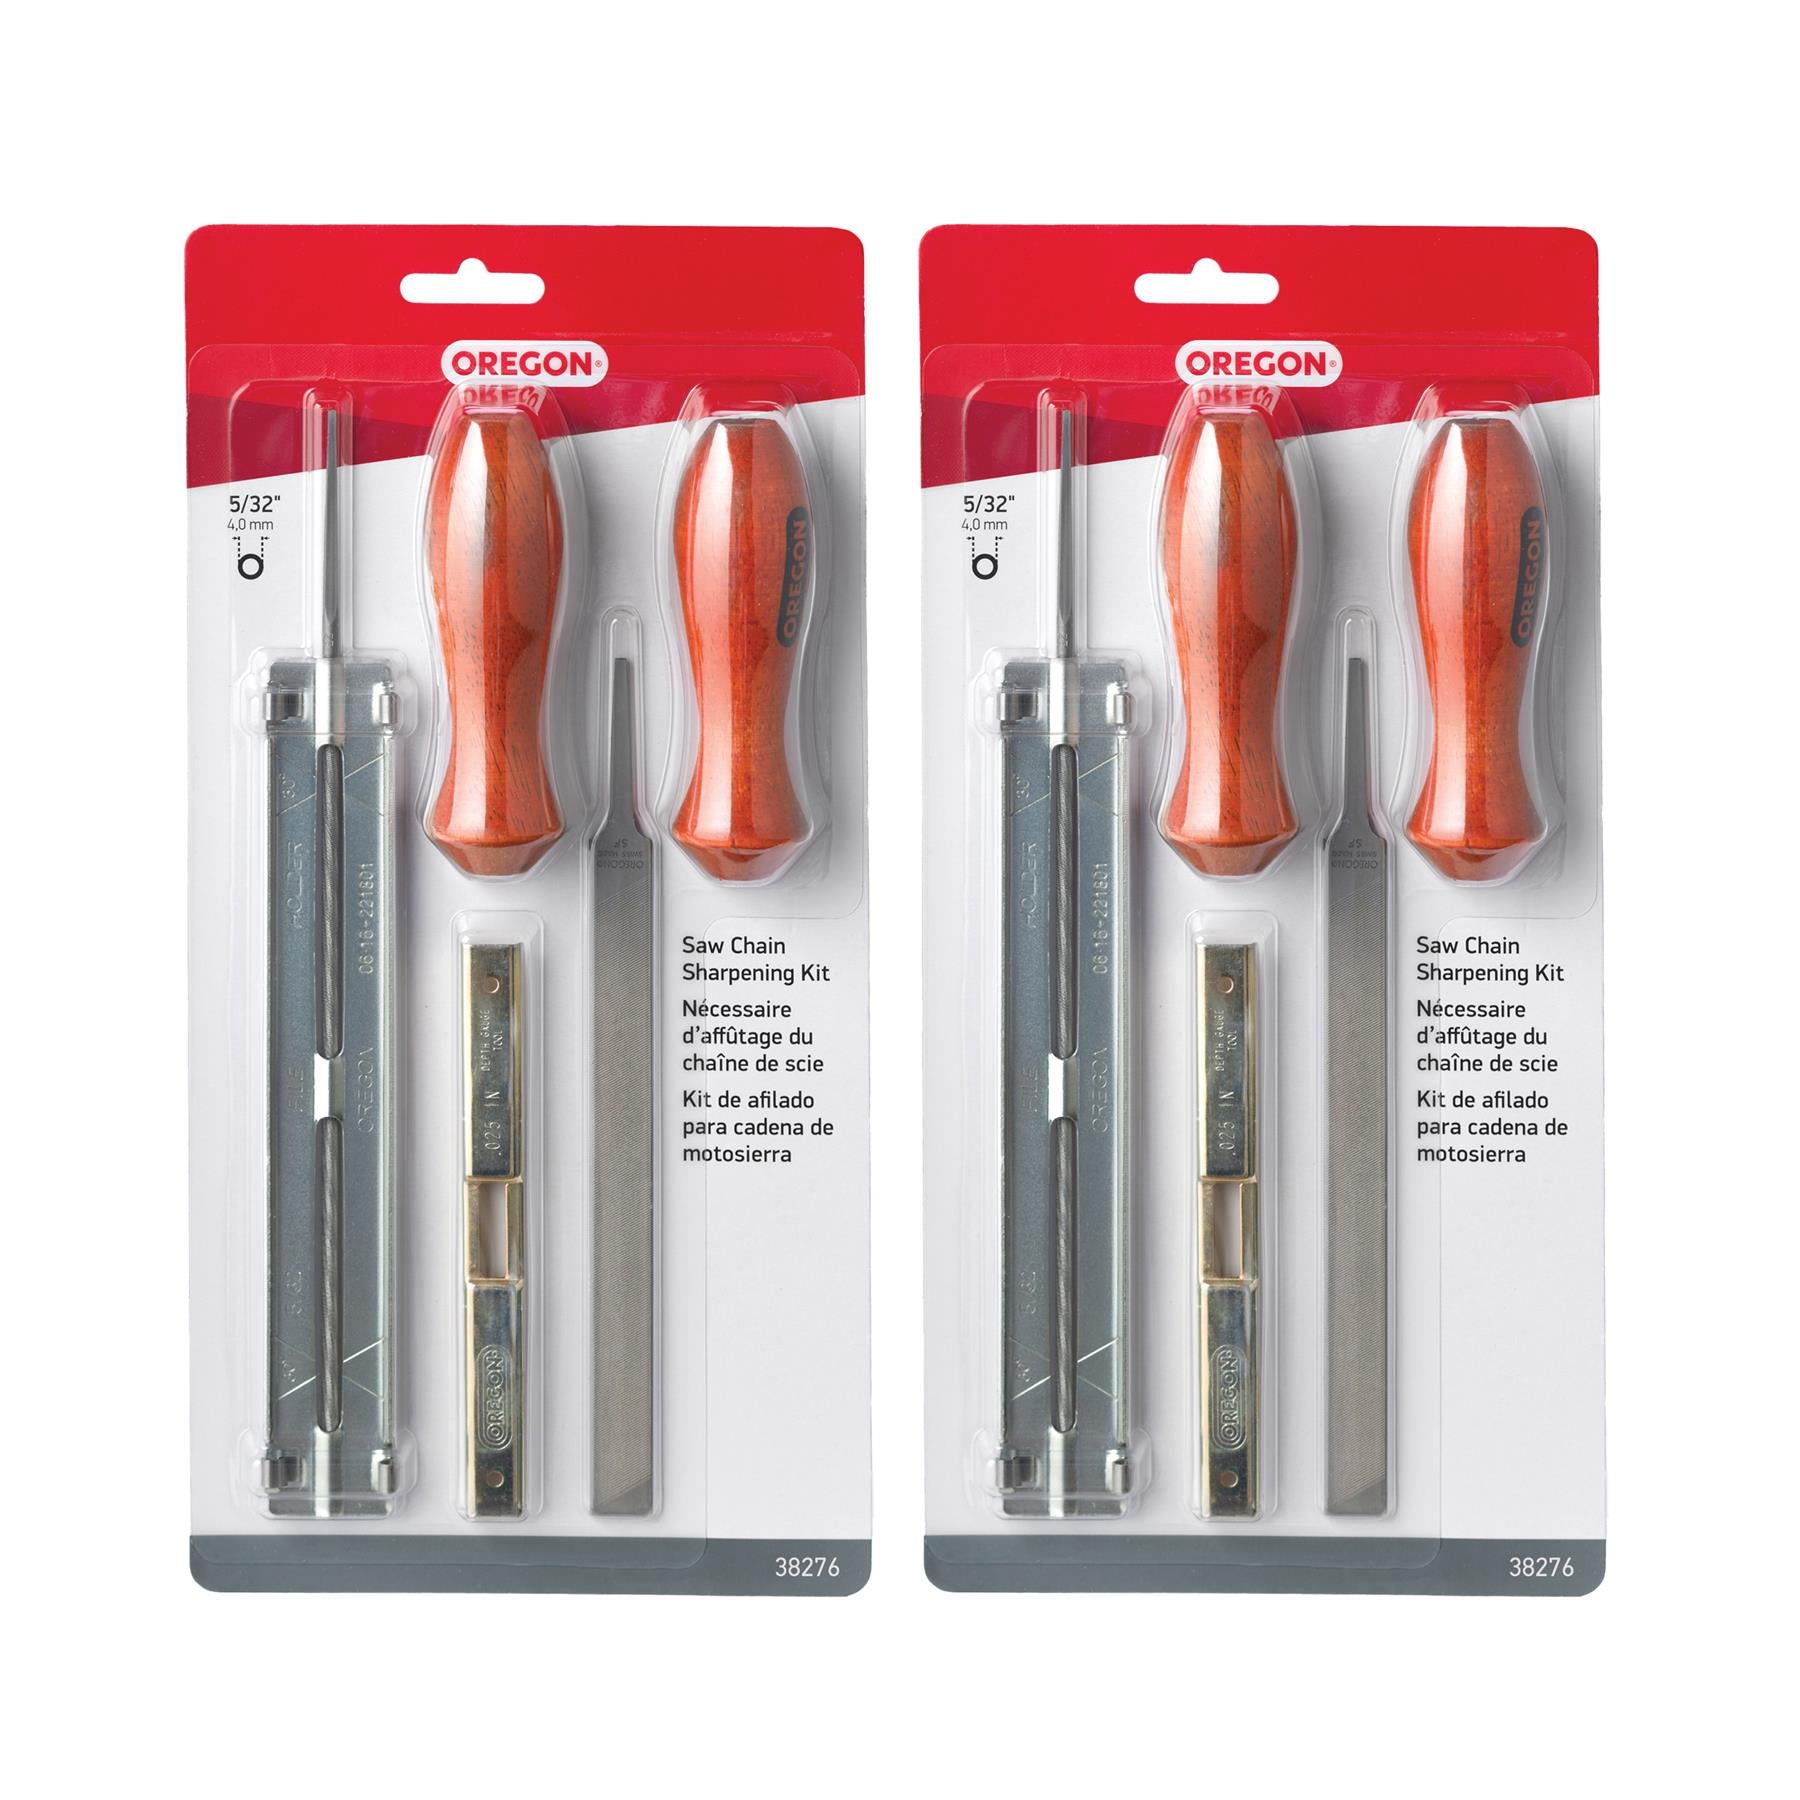 Oregon 38276 Chain Sharpening Kit with 5/32" File